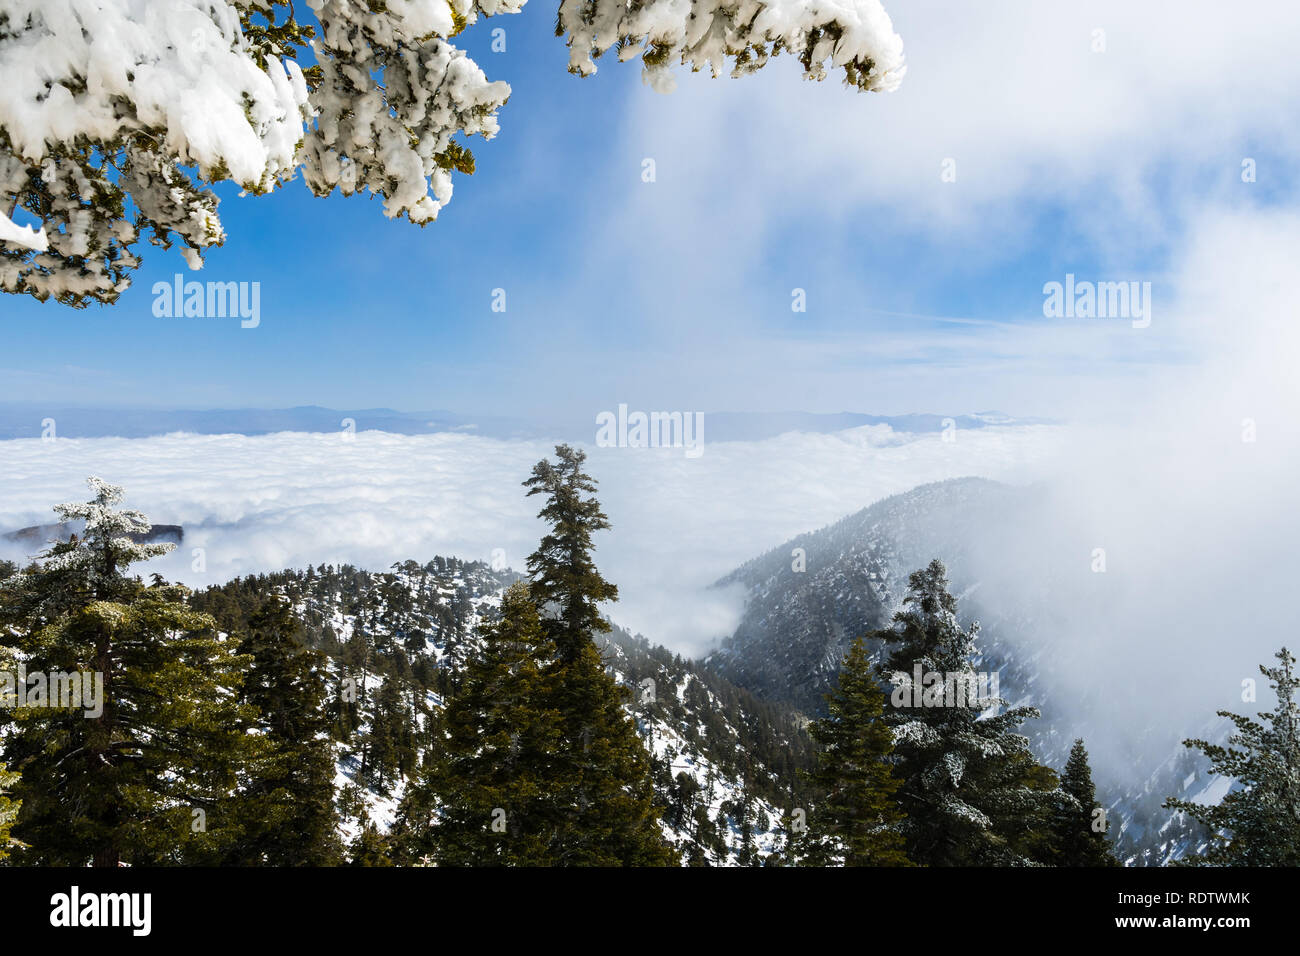 Evergreen trees high on the mountain; sea of white clouds in the background covering the valley, Mount San Antonio (Mt Baldy), Los Angeles county, Cal Stock Photo